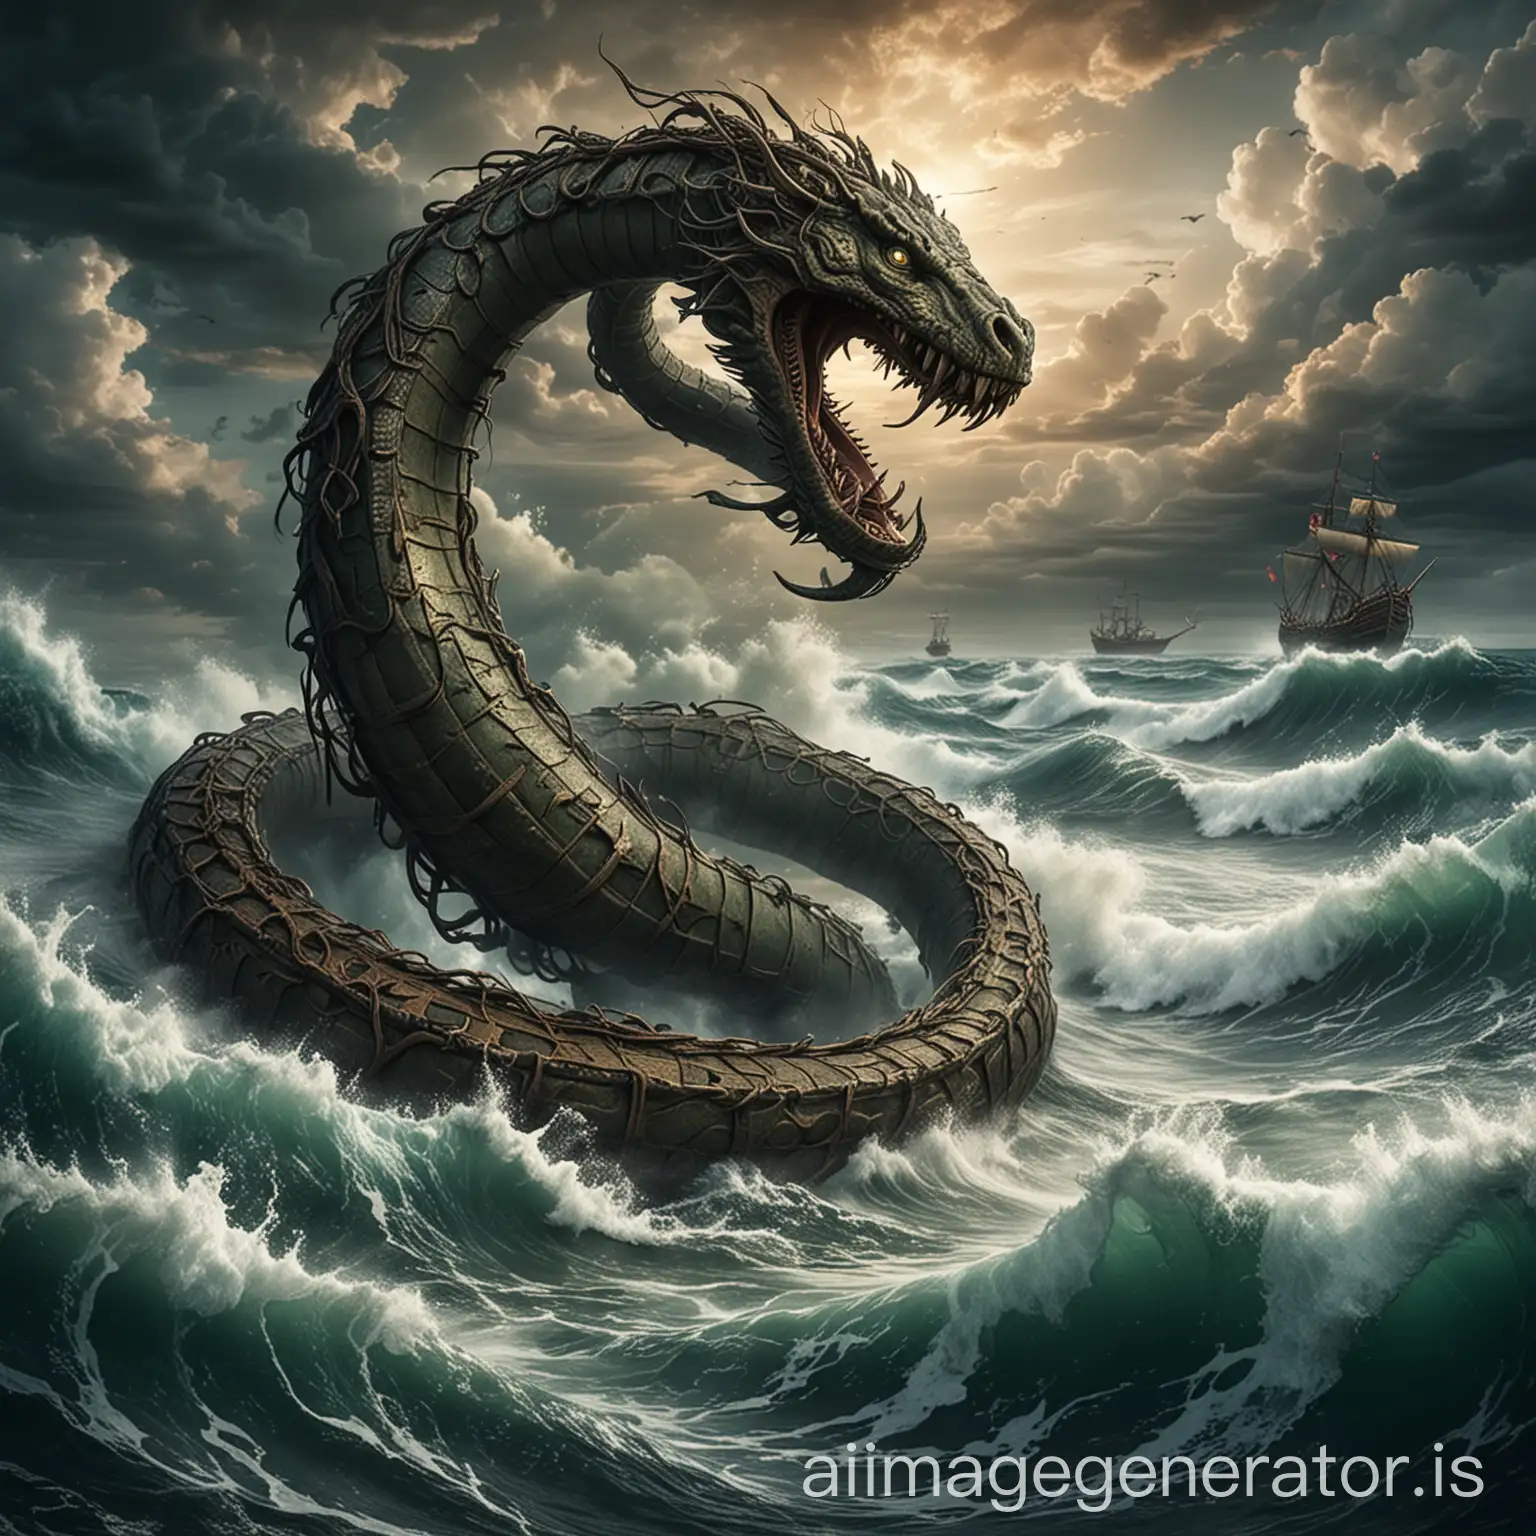 Mythical-Midgard-Serpent-Causes-Tremors-in-the-Ocean